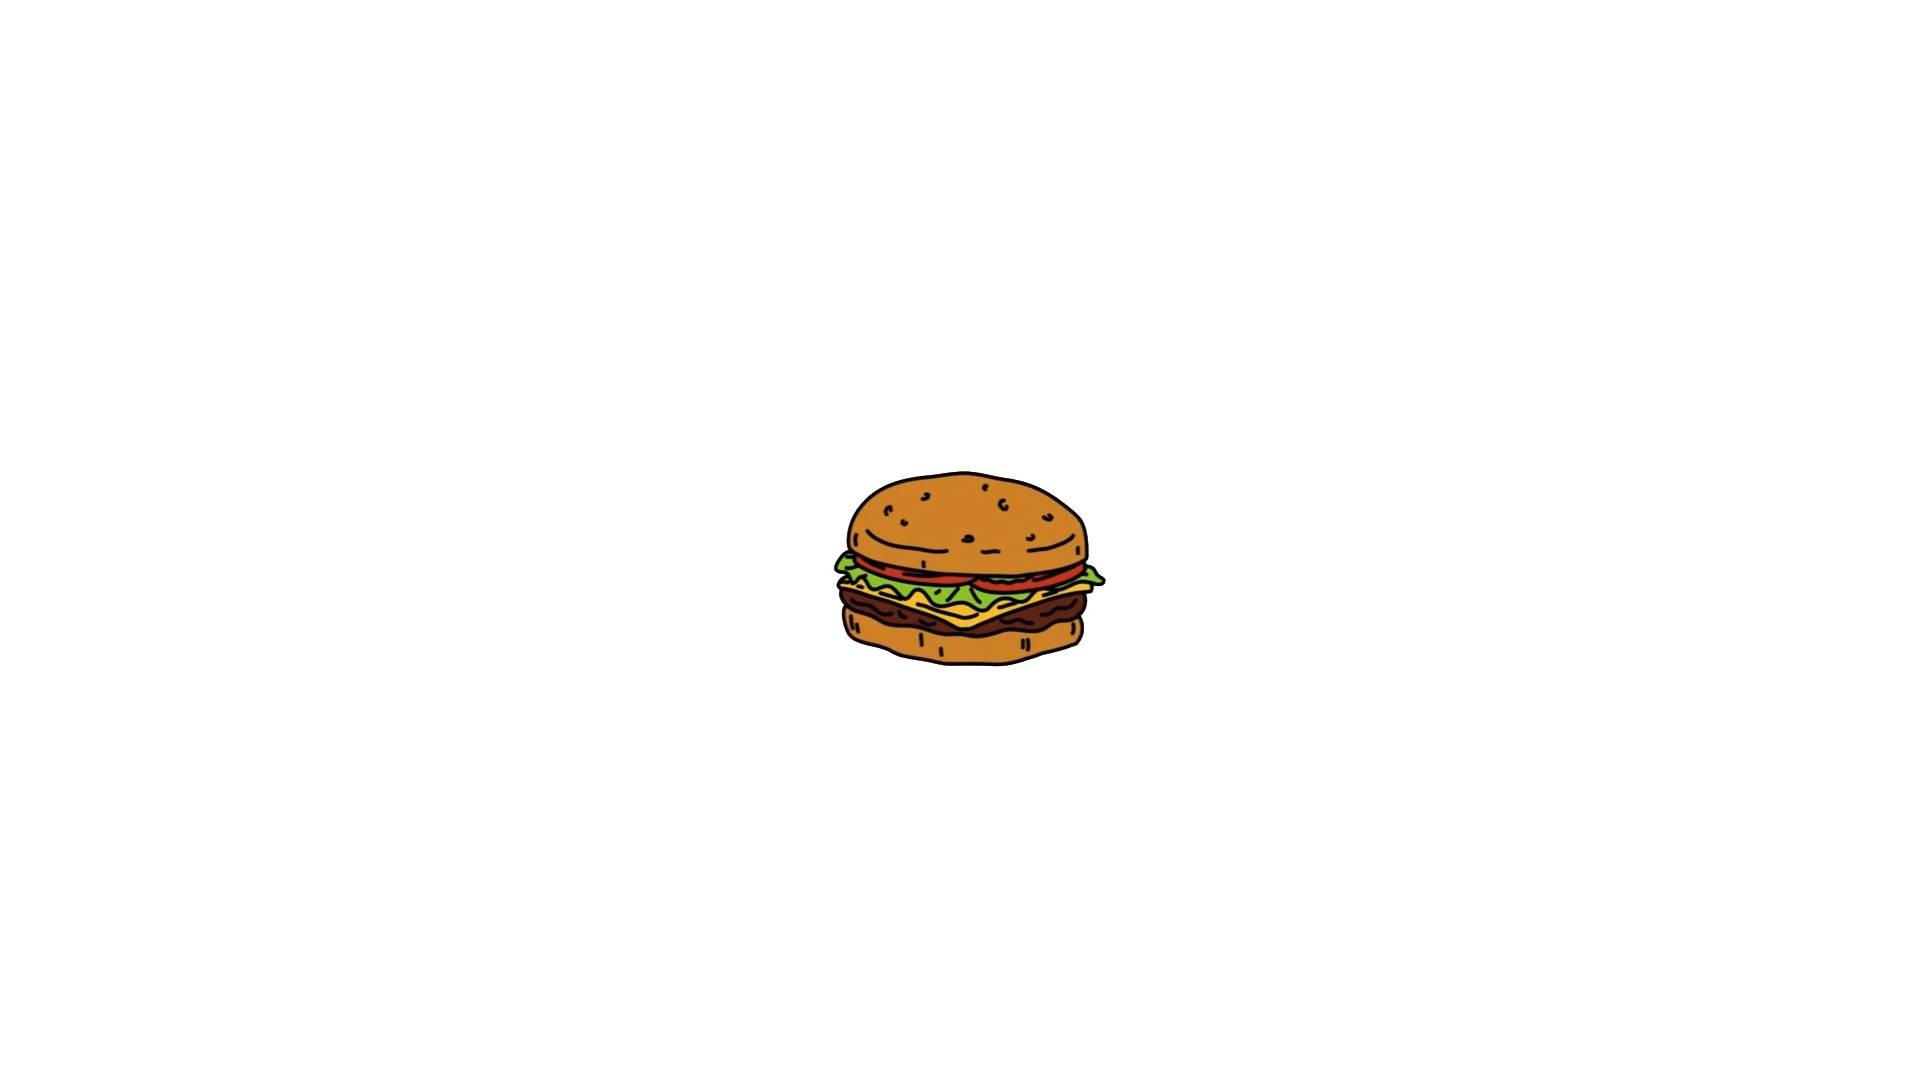 Bobs Burgers Wallpaper. by MIGRANE0Aug 15 2015. Load 26 more images Grid view